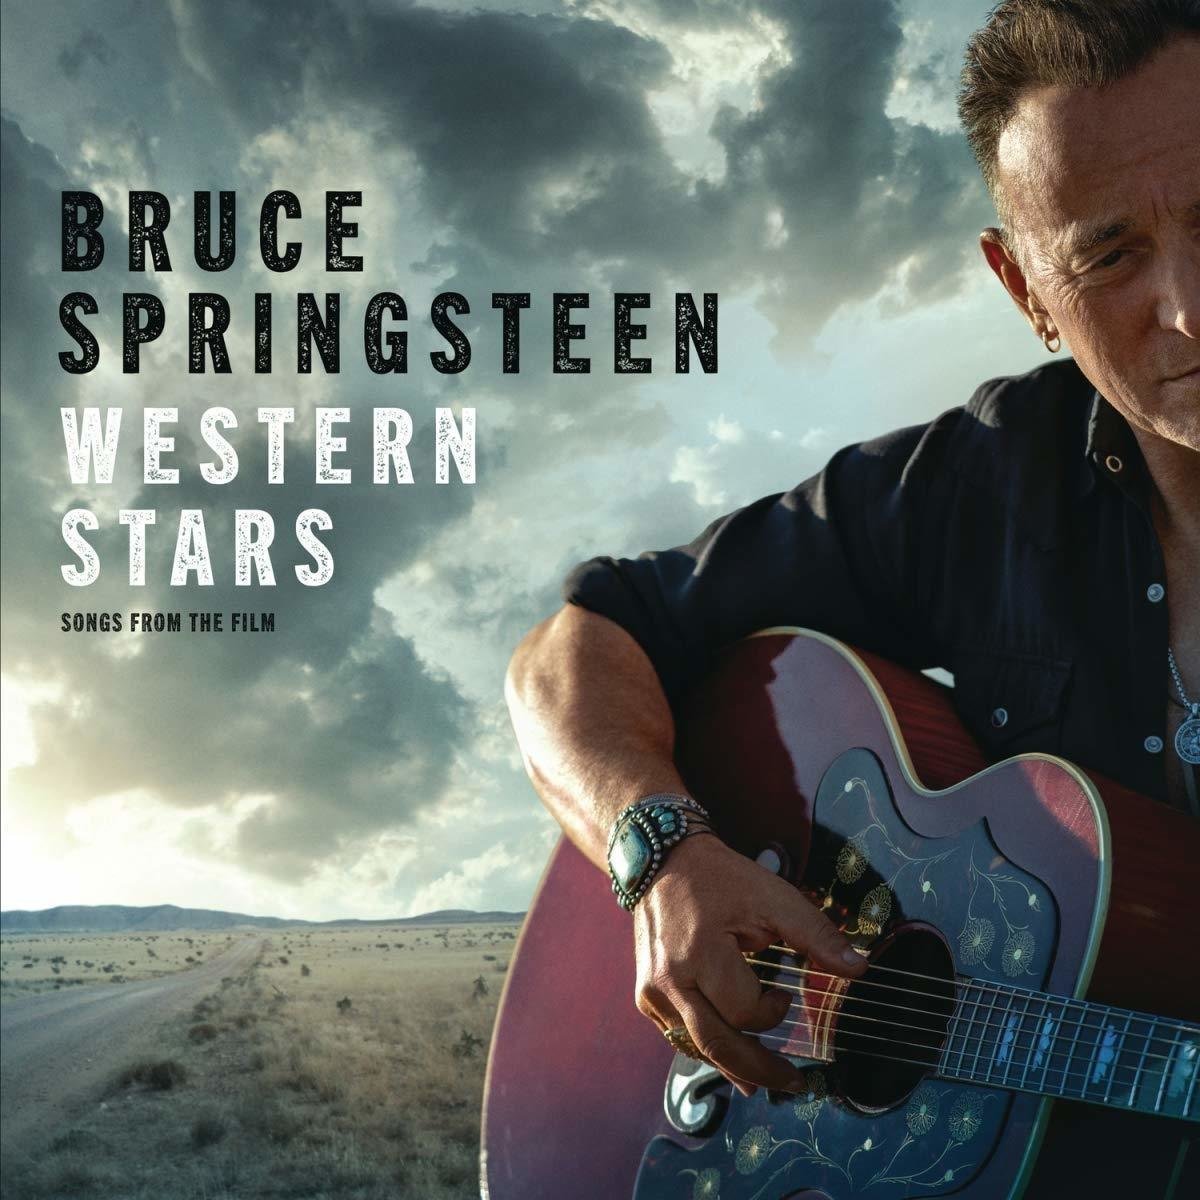 Vinyl Record Bruce Springsteen Western Stars - Songs From the Film (2 LP)